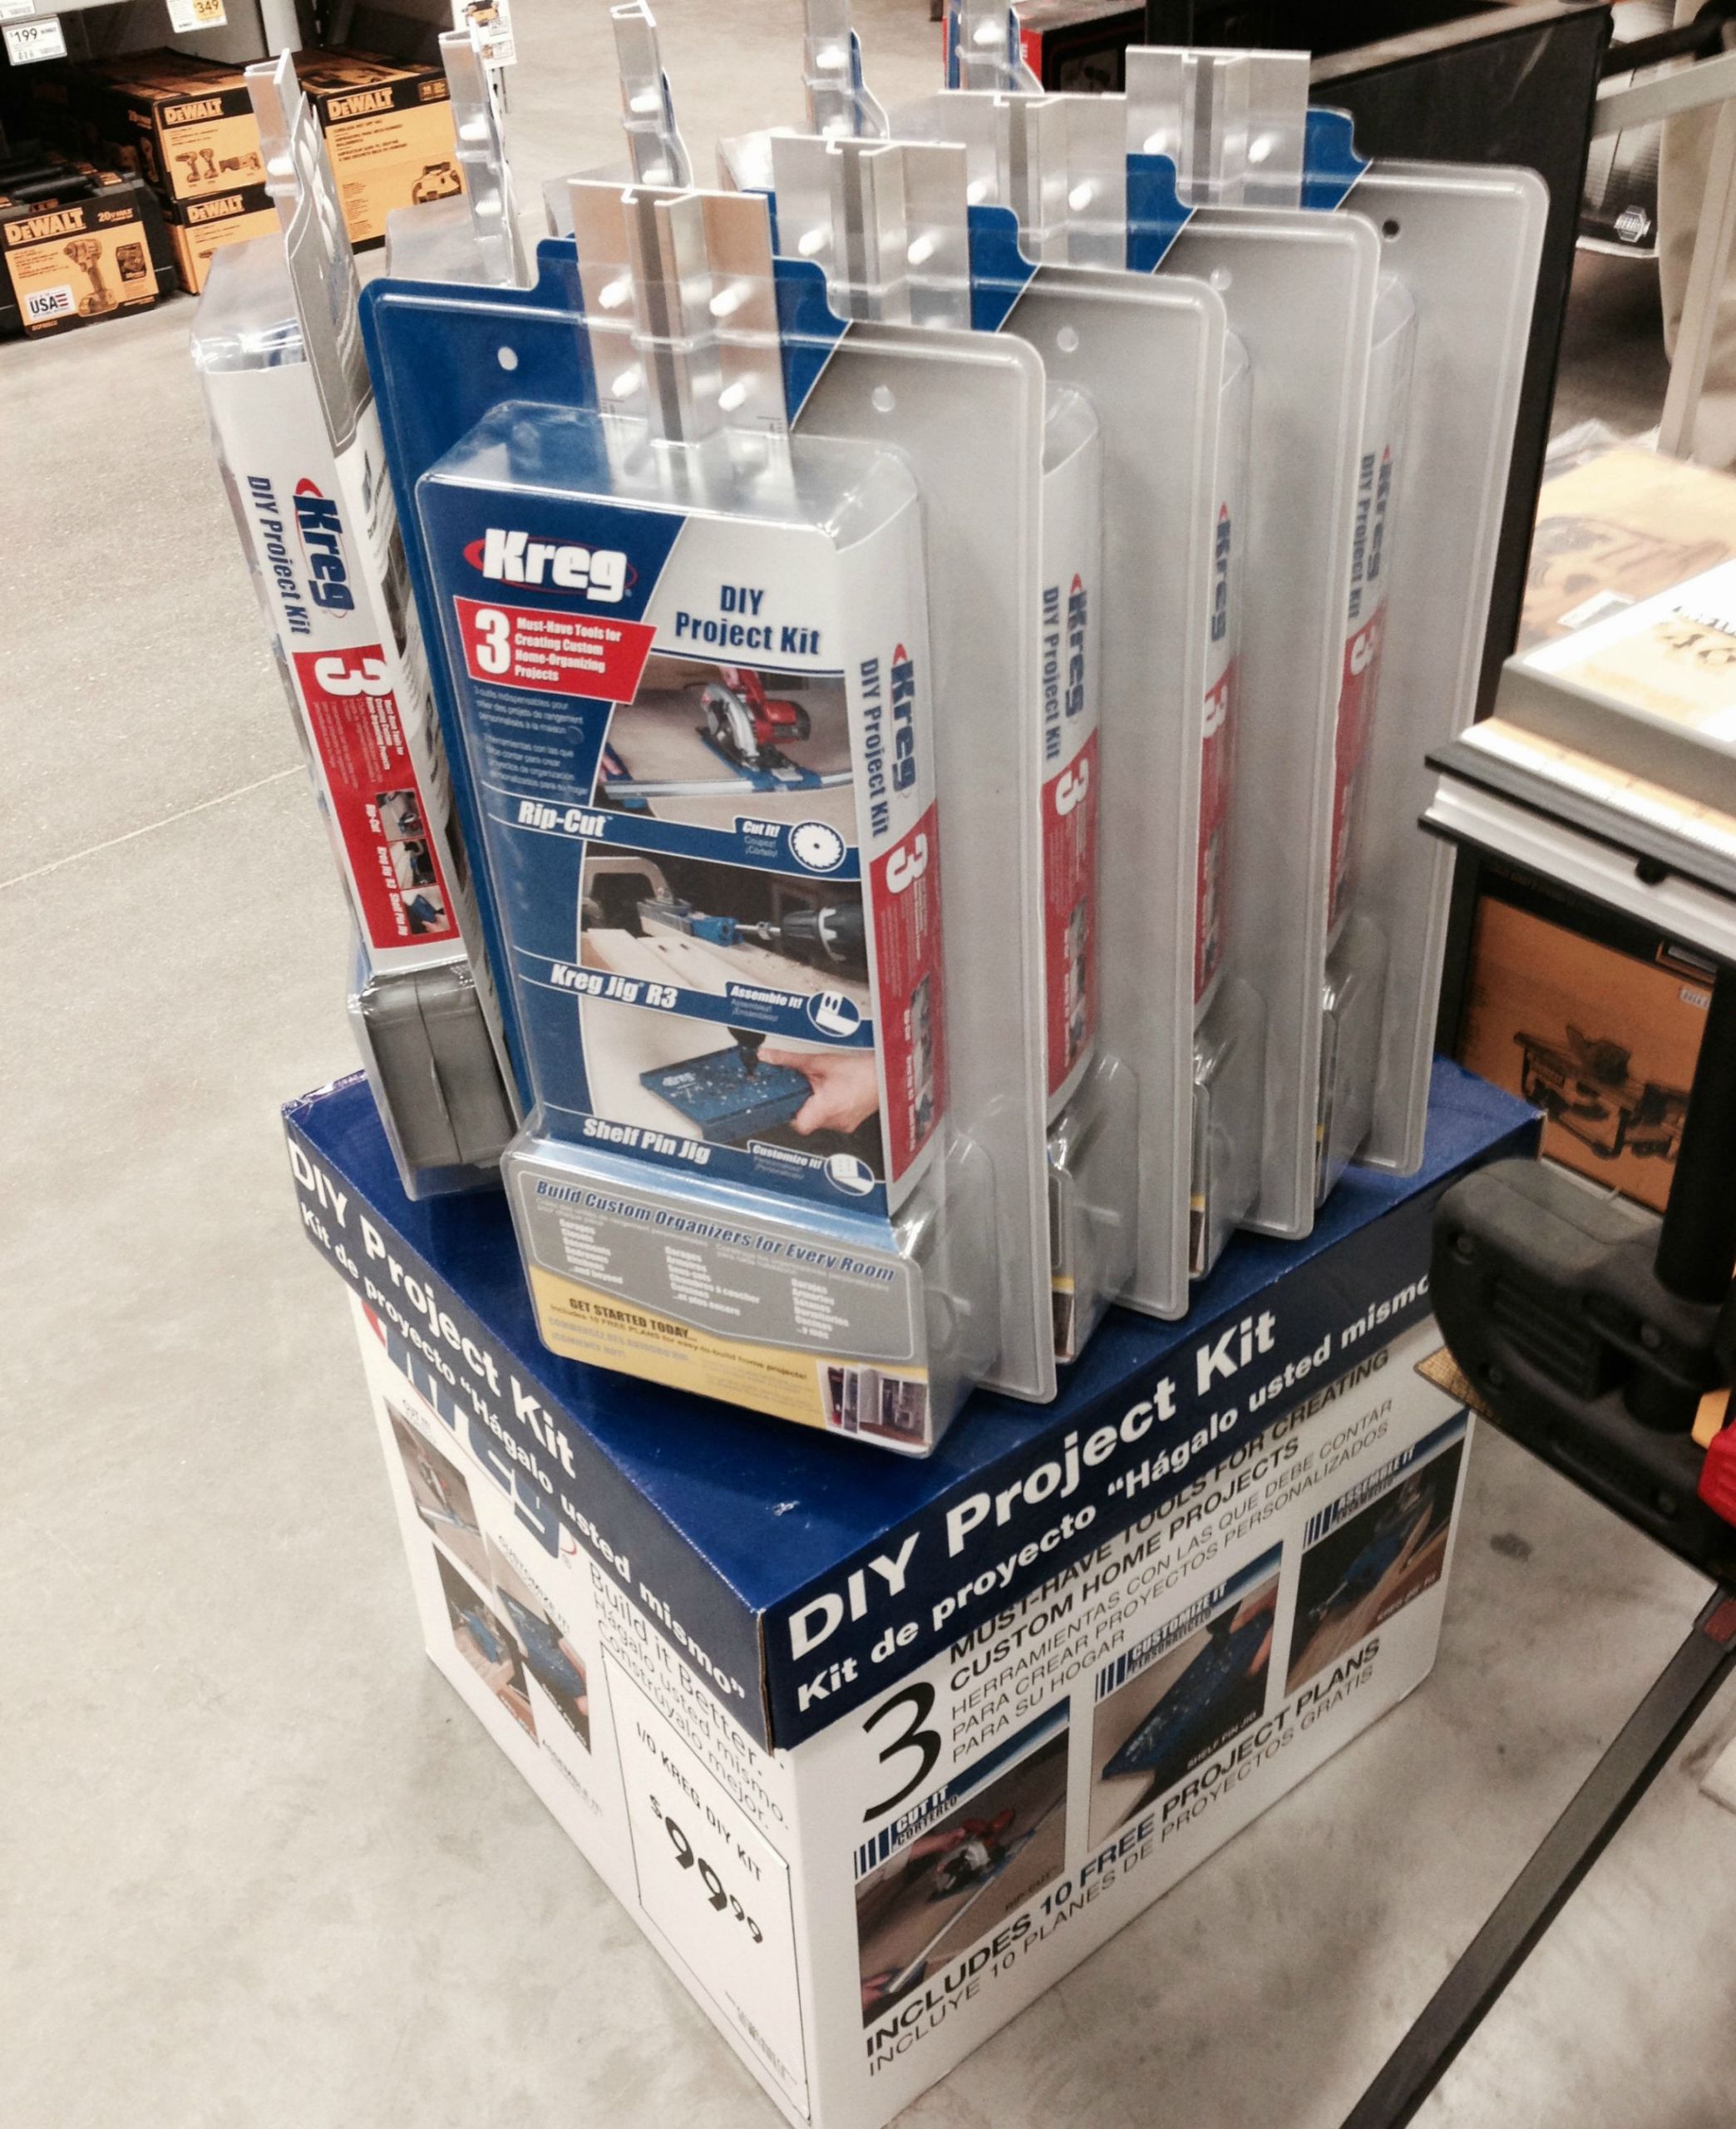 Kreg DIY Kit
 Spotted the all new Kreg DIY Project Kit at lowes